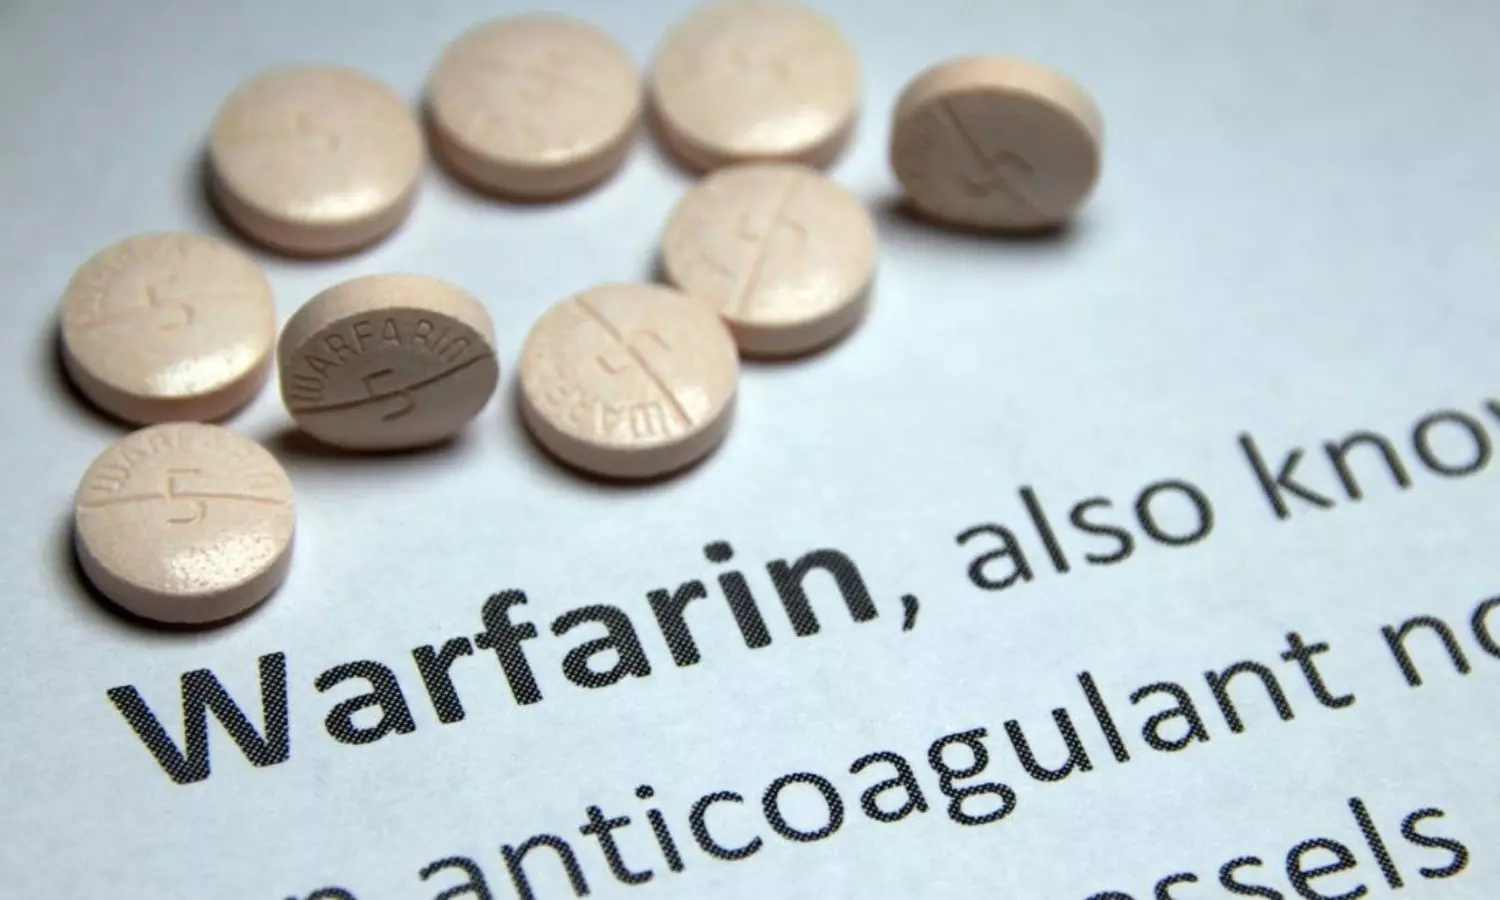 Warfarin use speeds up aortic stenosis progression, ups chances of AVR and death: JACC